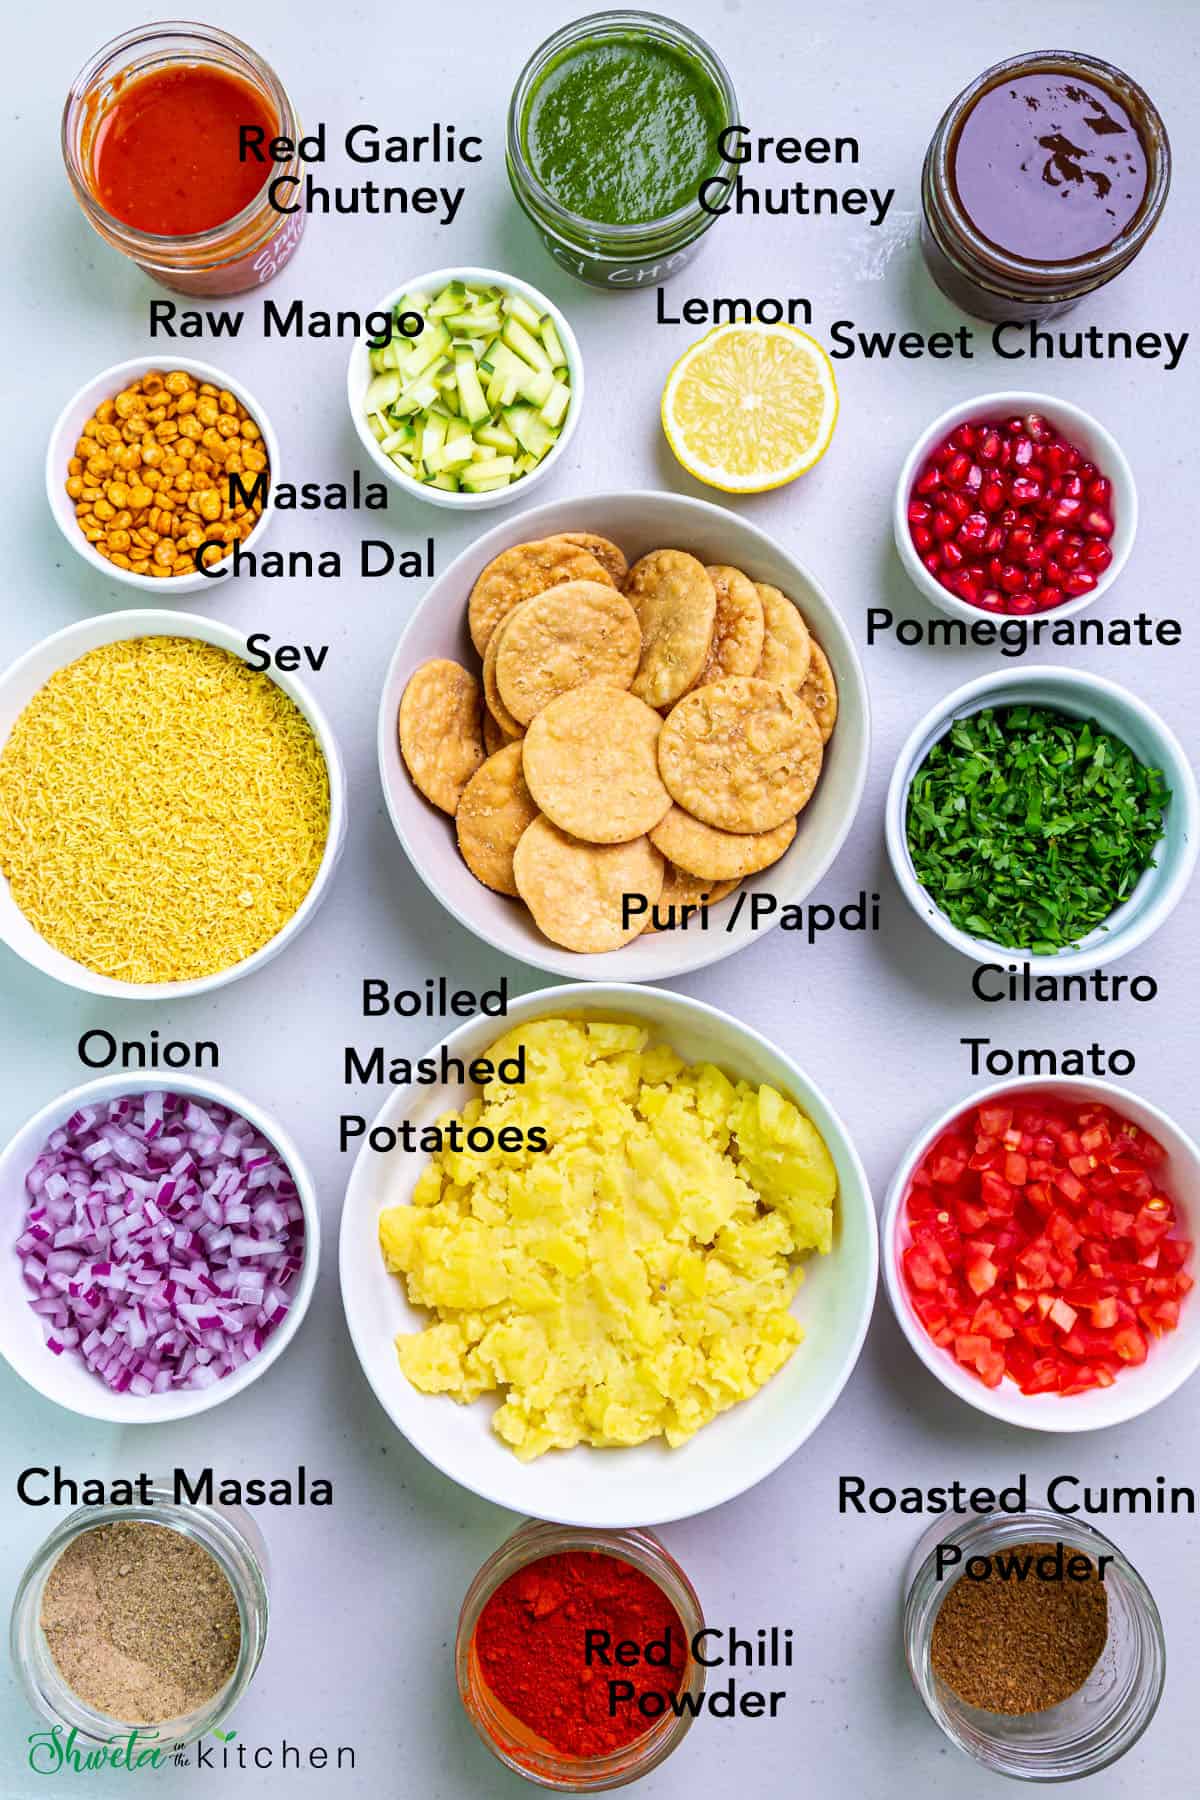 Sev puri ingredients in bowls on white surface